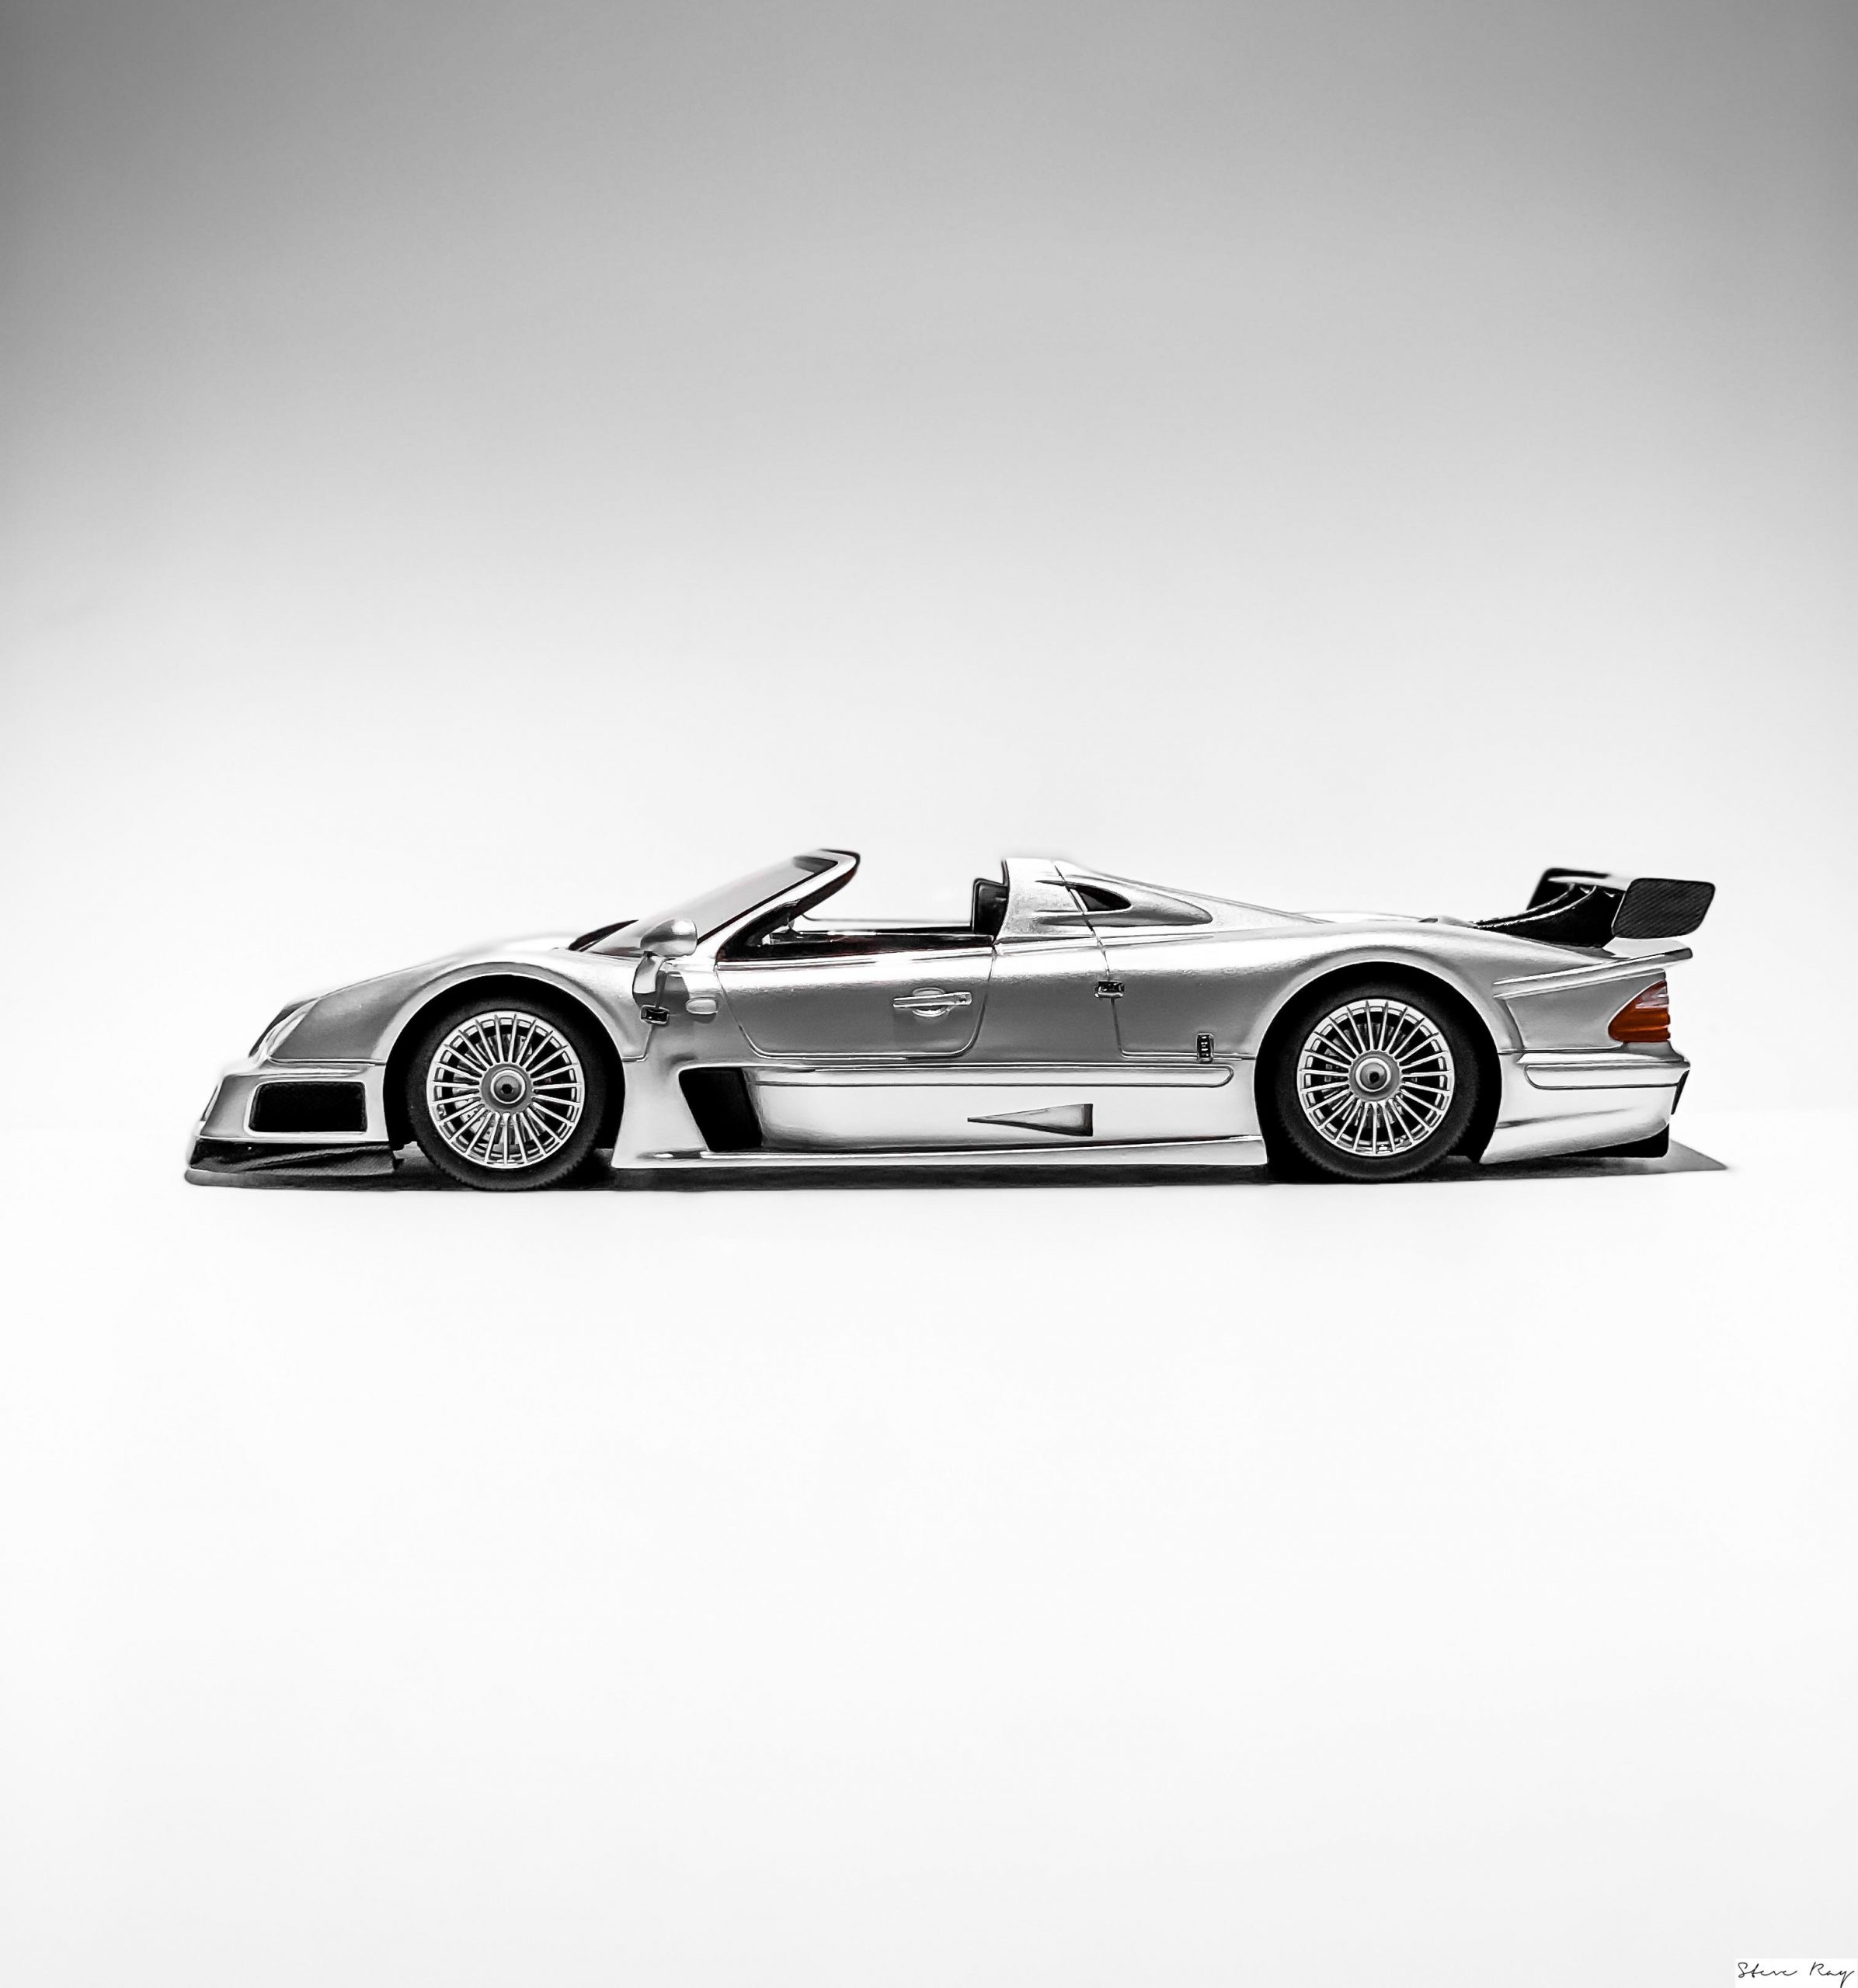 MERCEDES BENZ CLK GTR ROADSTER one of my favorite photos ive taken. Really have been enjoying the group.